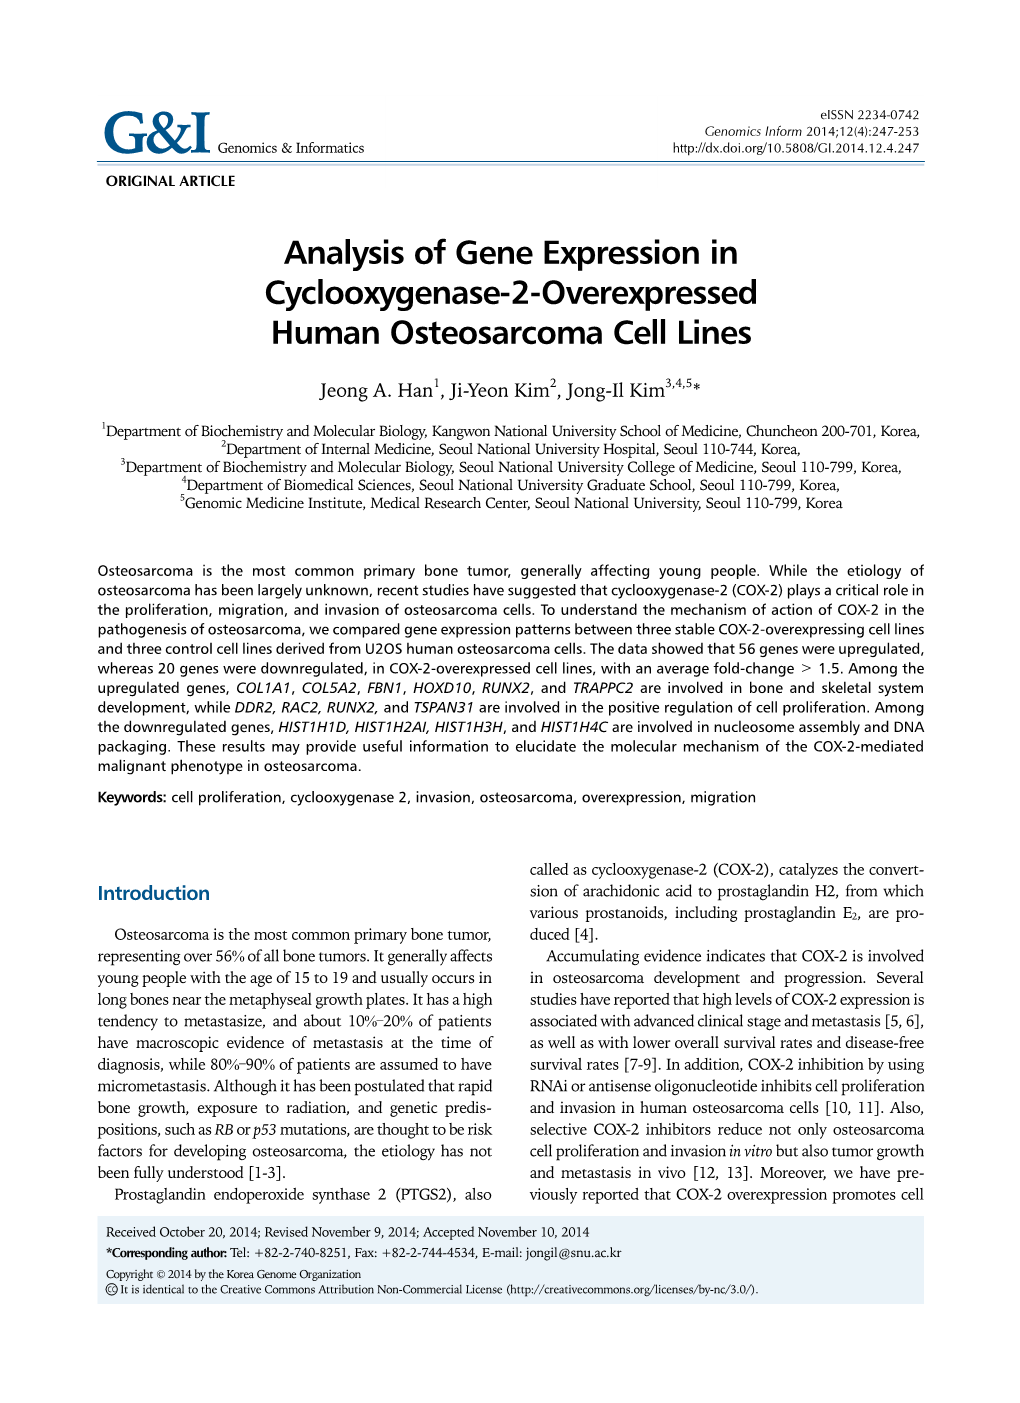 Analysis of Gene Expression in Cyclooxygenase-2-Overexpressed Human Osteosarcoma Cell Lines